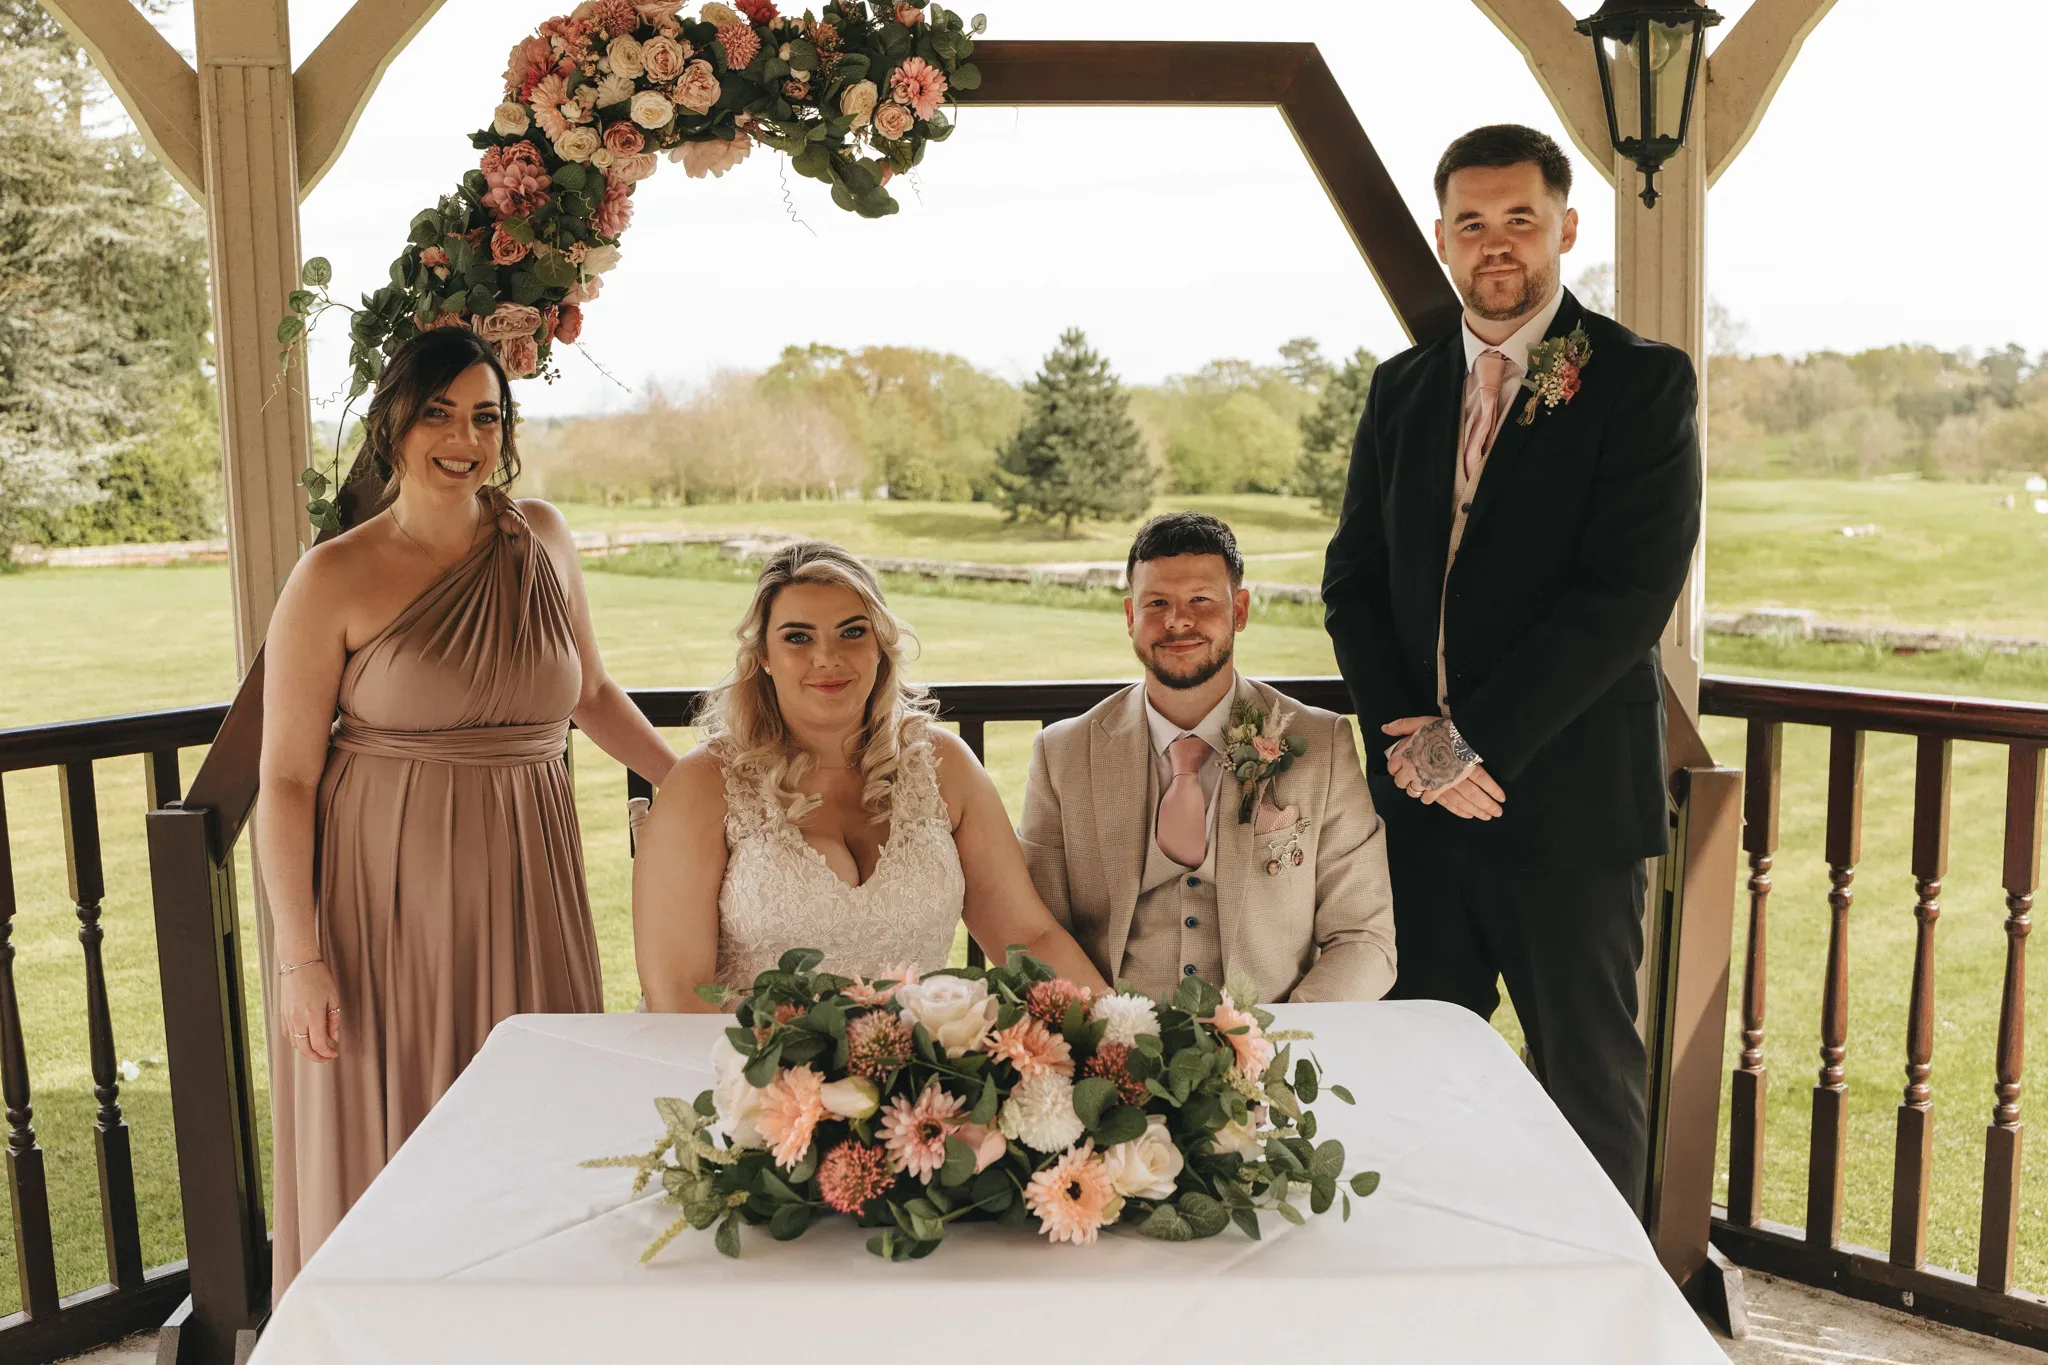 Four people at a wedding ceremony under a gazebo with floral decorations, smiling. two bridesmaids in dresses flank a bride and groom seated at a table adorned with a floral centerpiece.